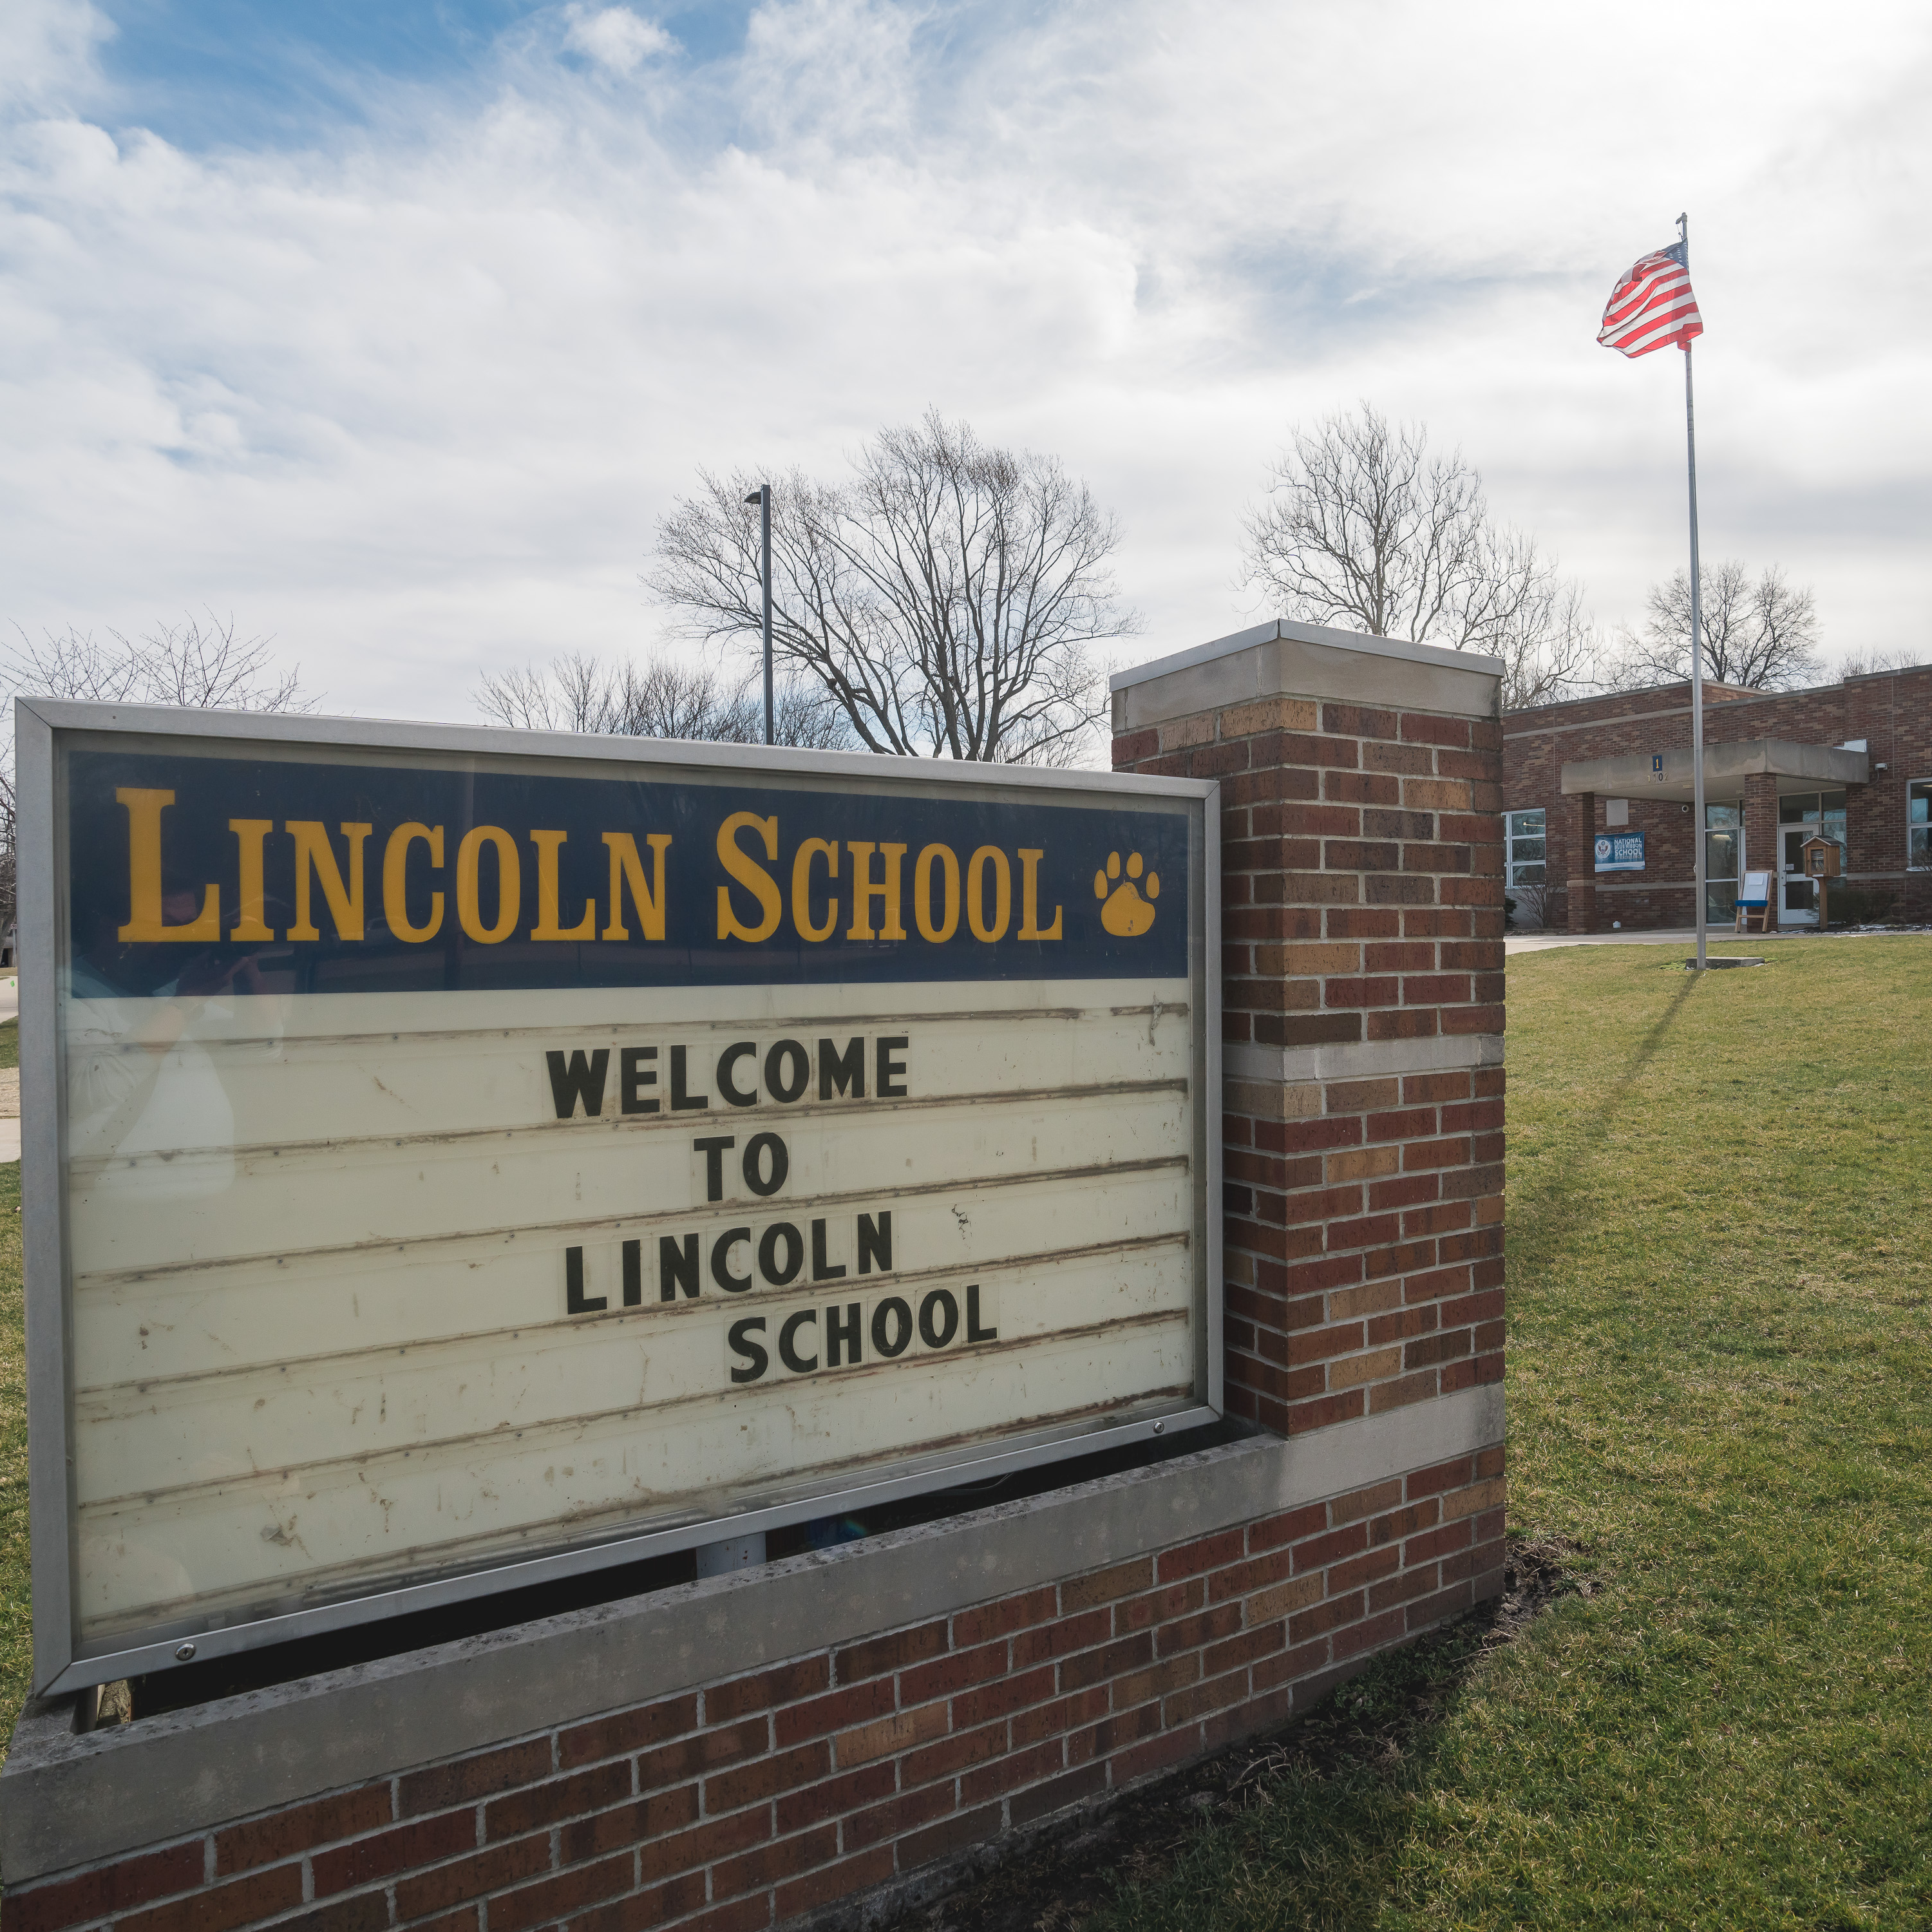 Lincoln school welcome sign and building